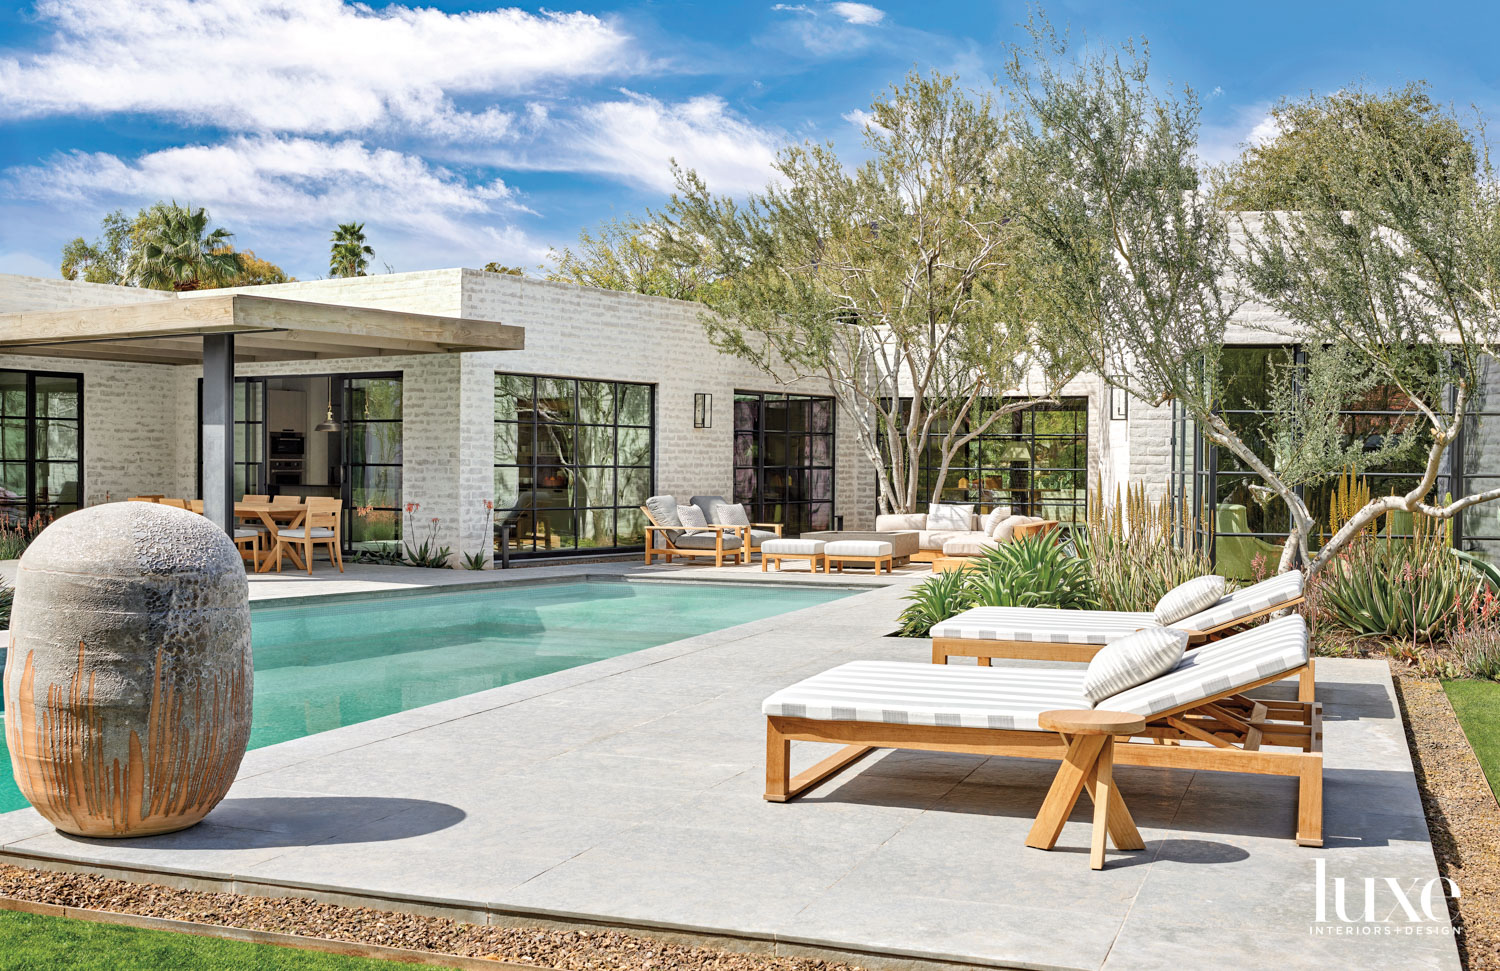 It’s Always Sunny In This Arizona Home With A Focus On Easy Living